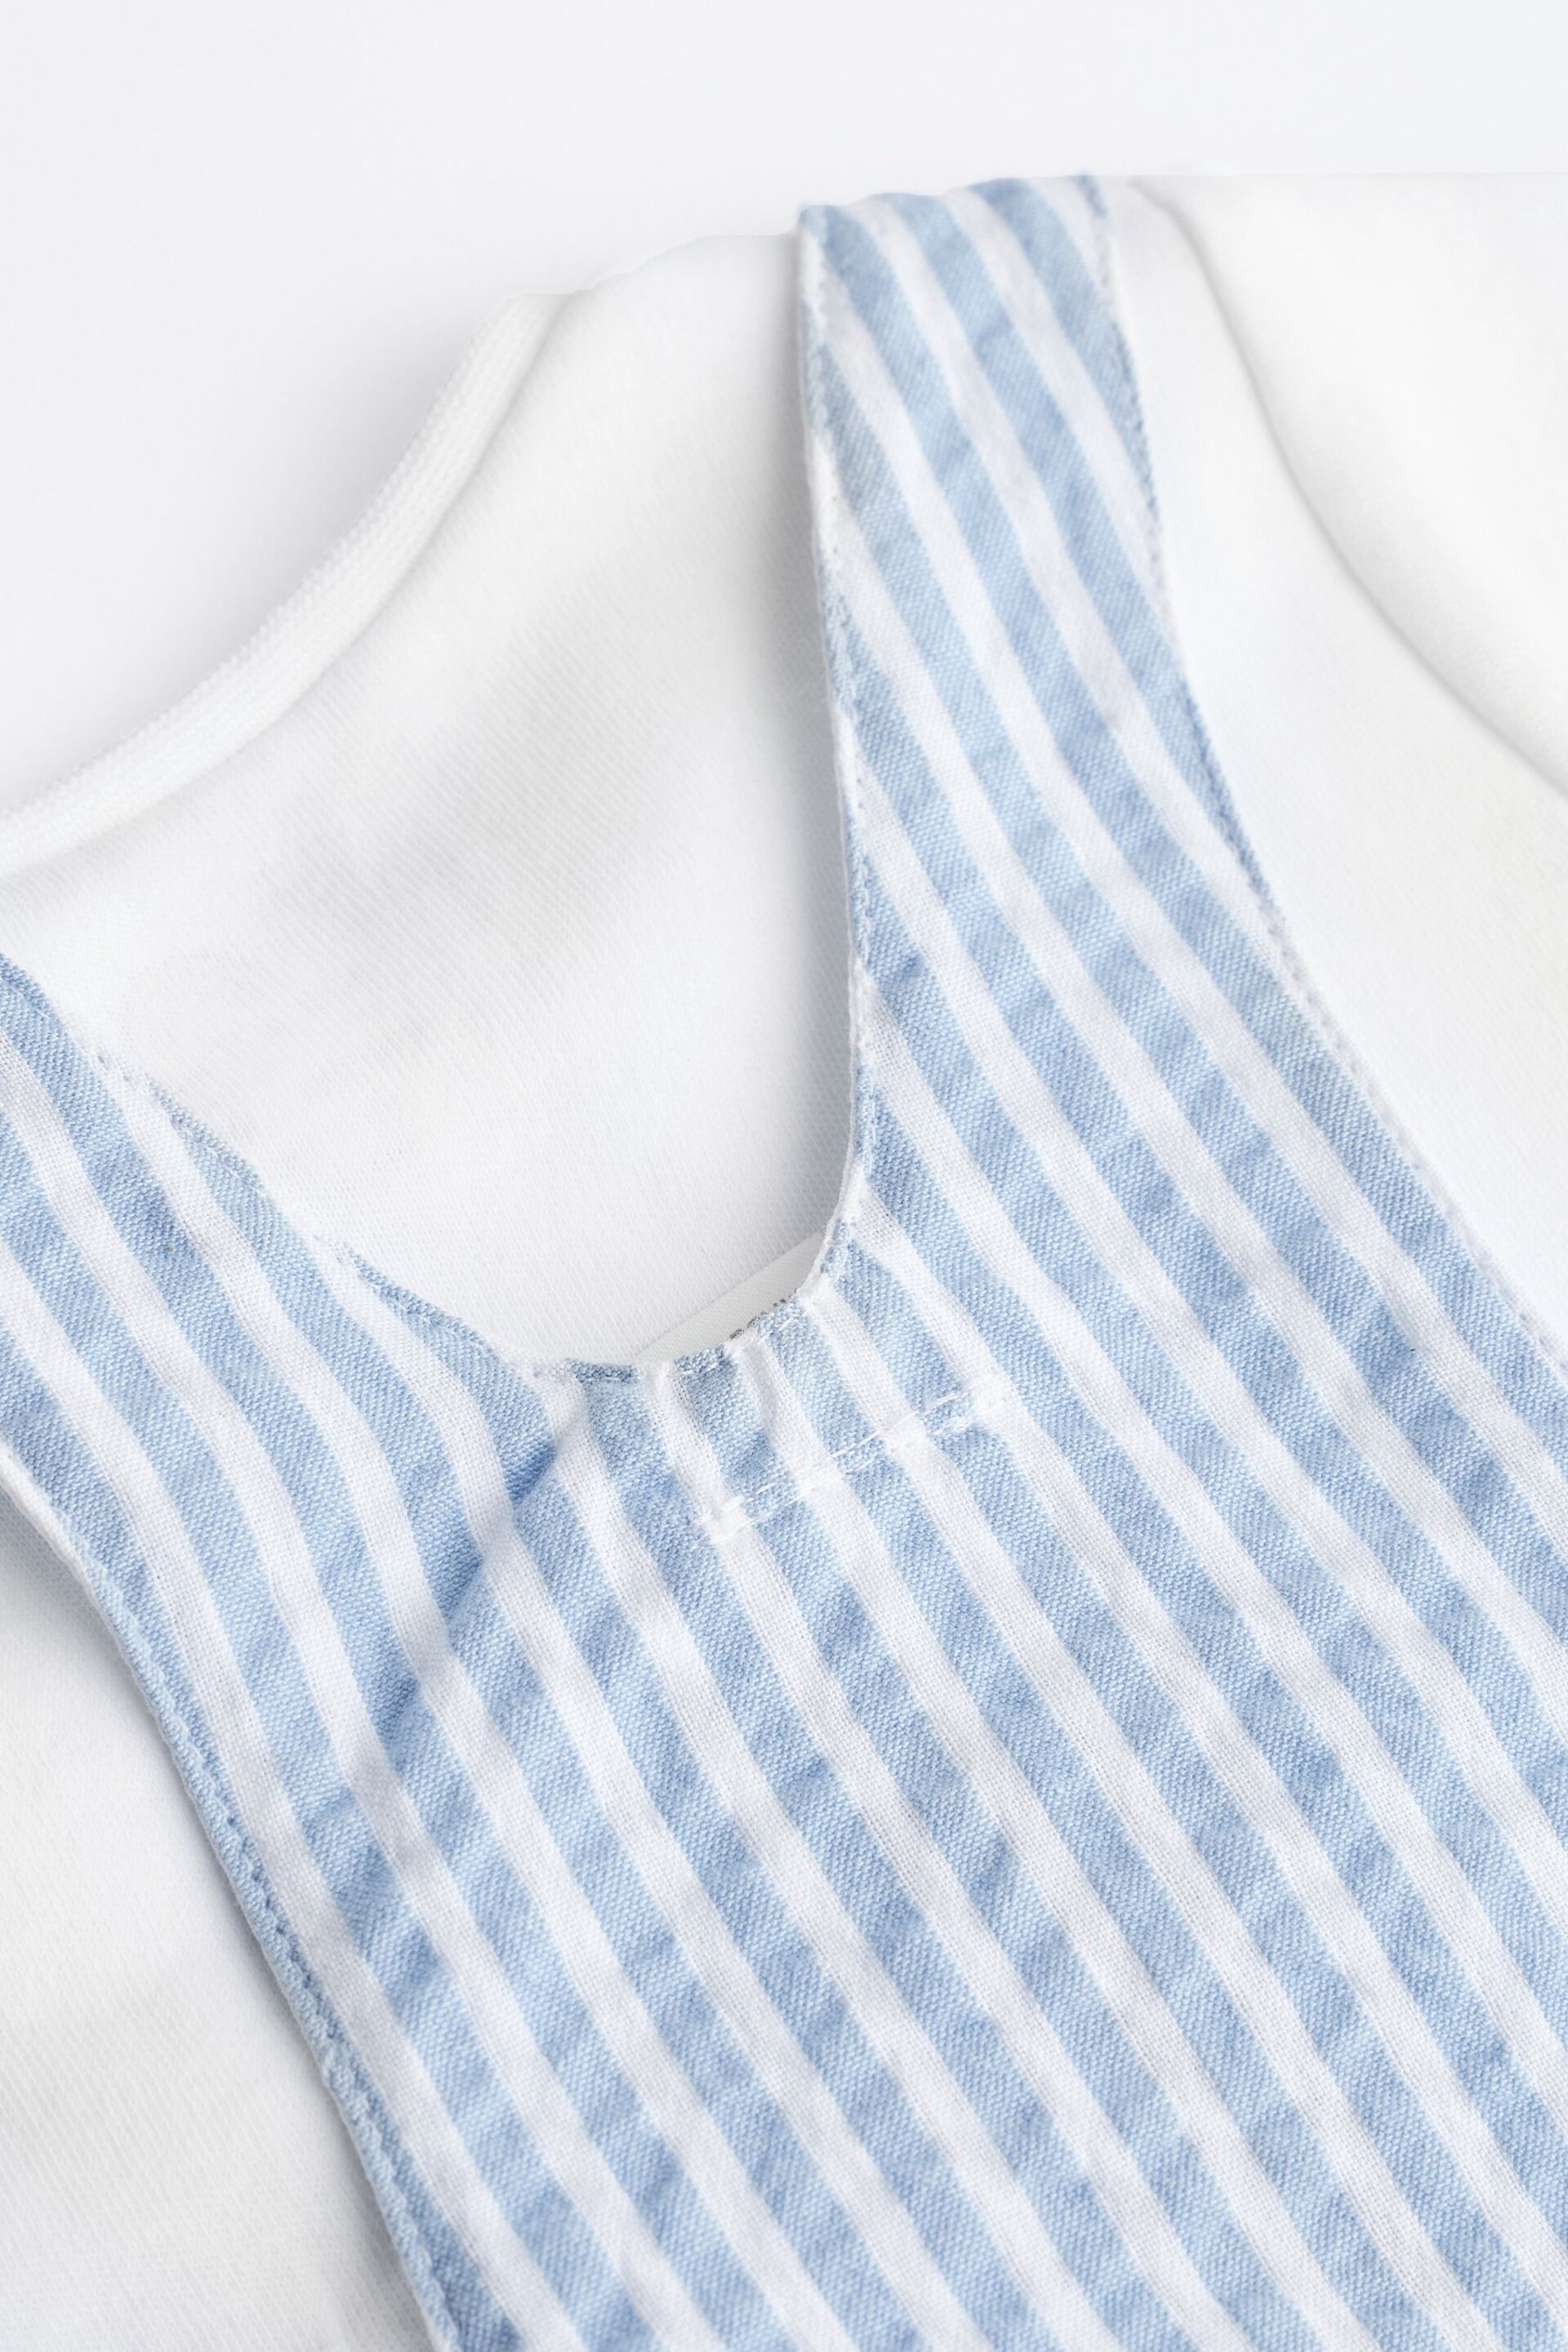 Blue/White Stripe Baby Woven Dungarees and Bodysuit Set (0mths-2yrs) - Image 6 of 7